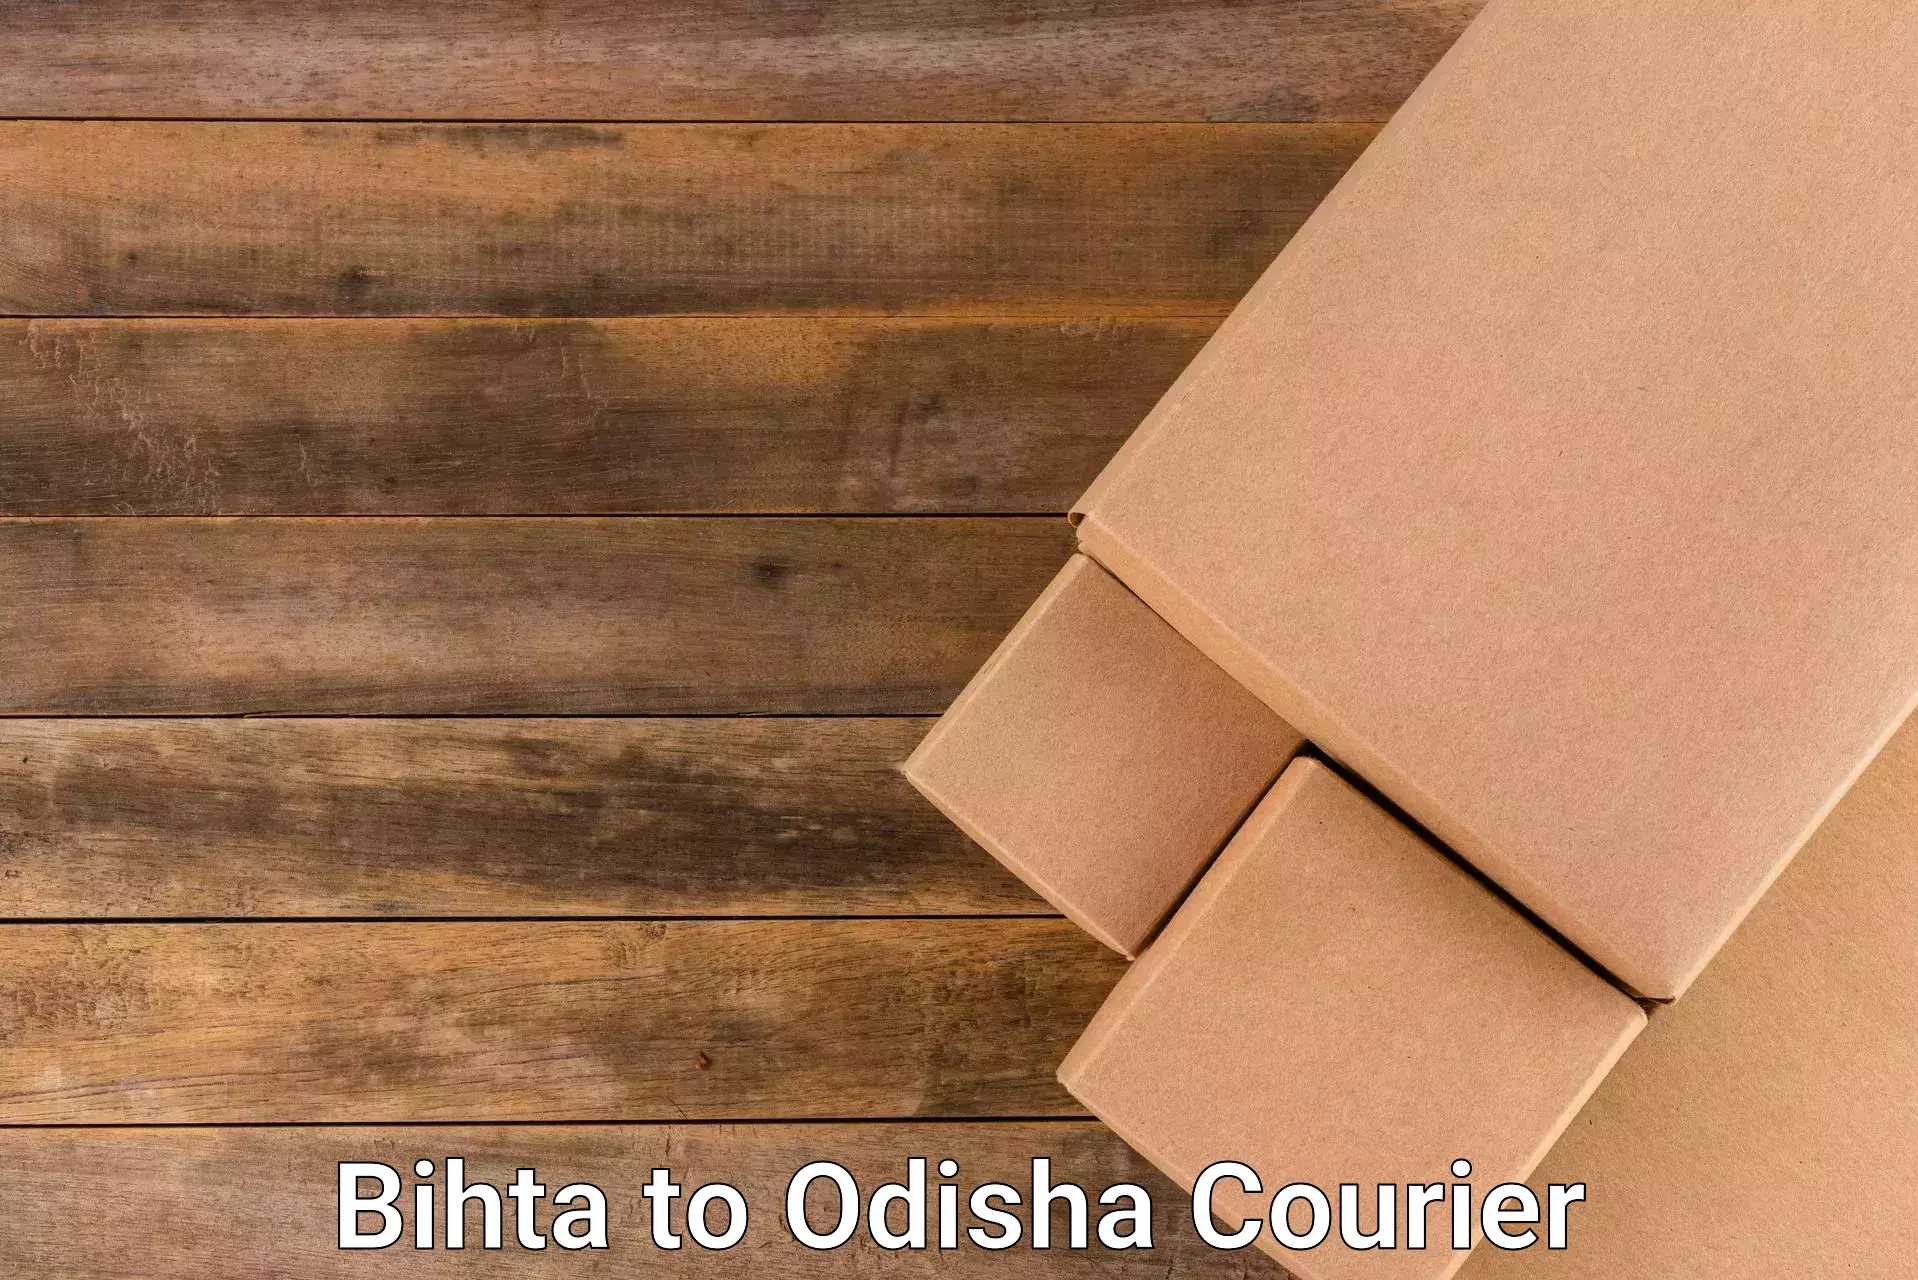 Subscription-based courier in Bihta to Telkoi